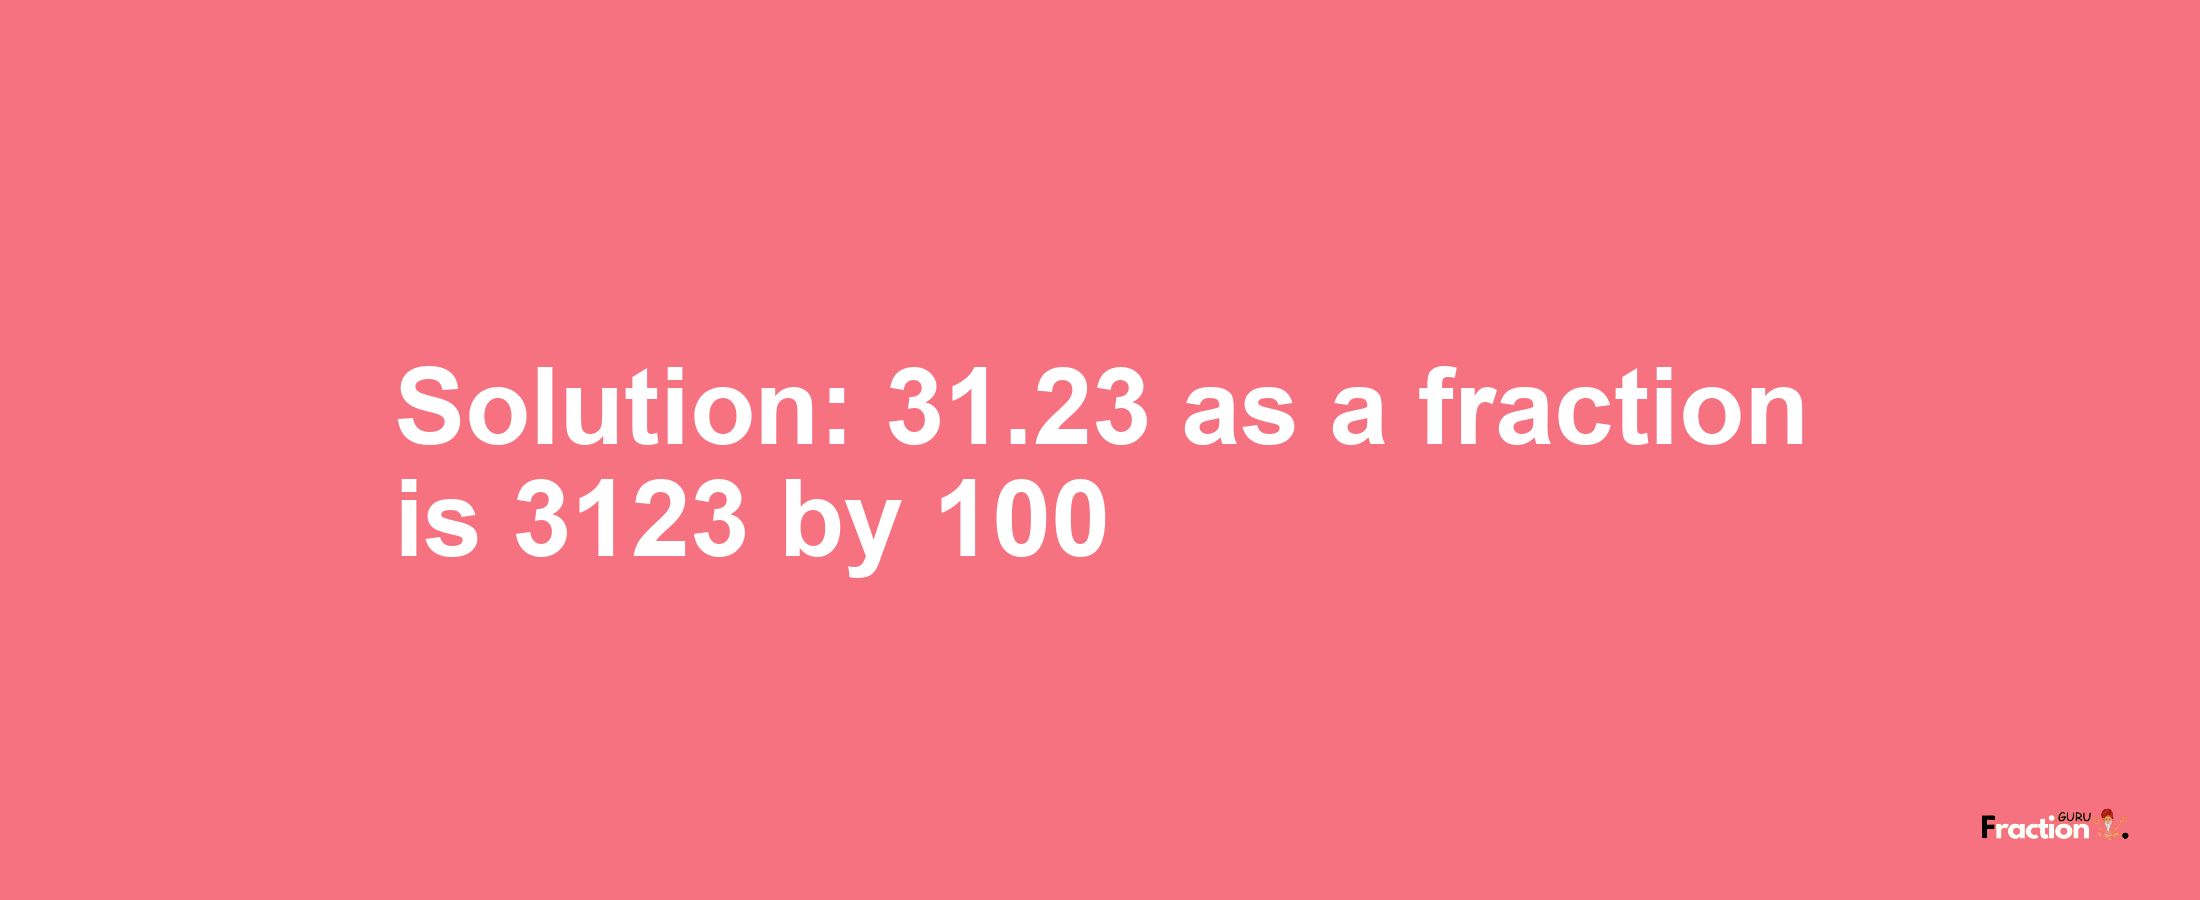 Solution:31.23 as a fraction is 3123/100